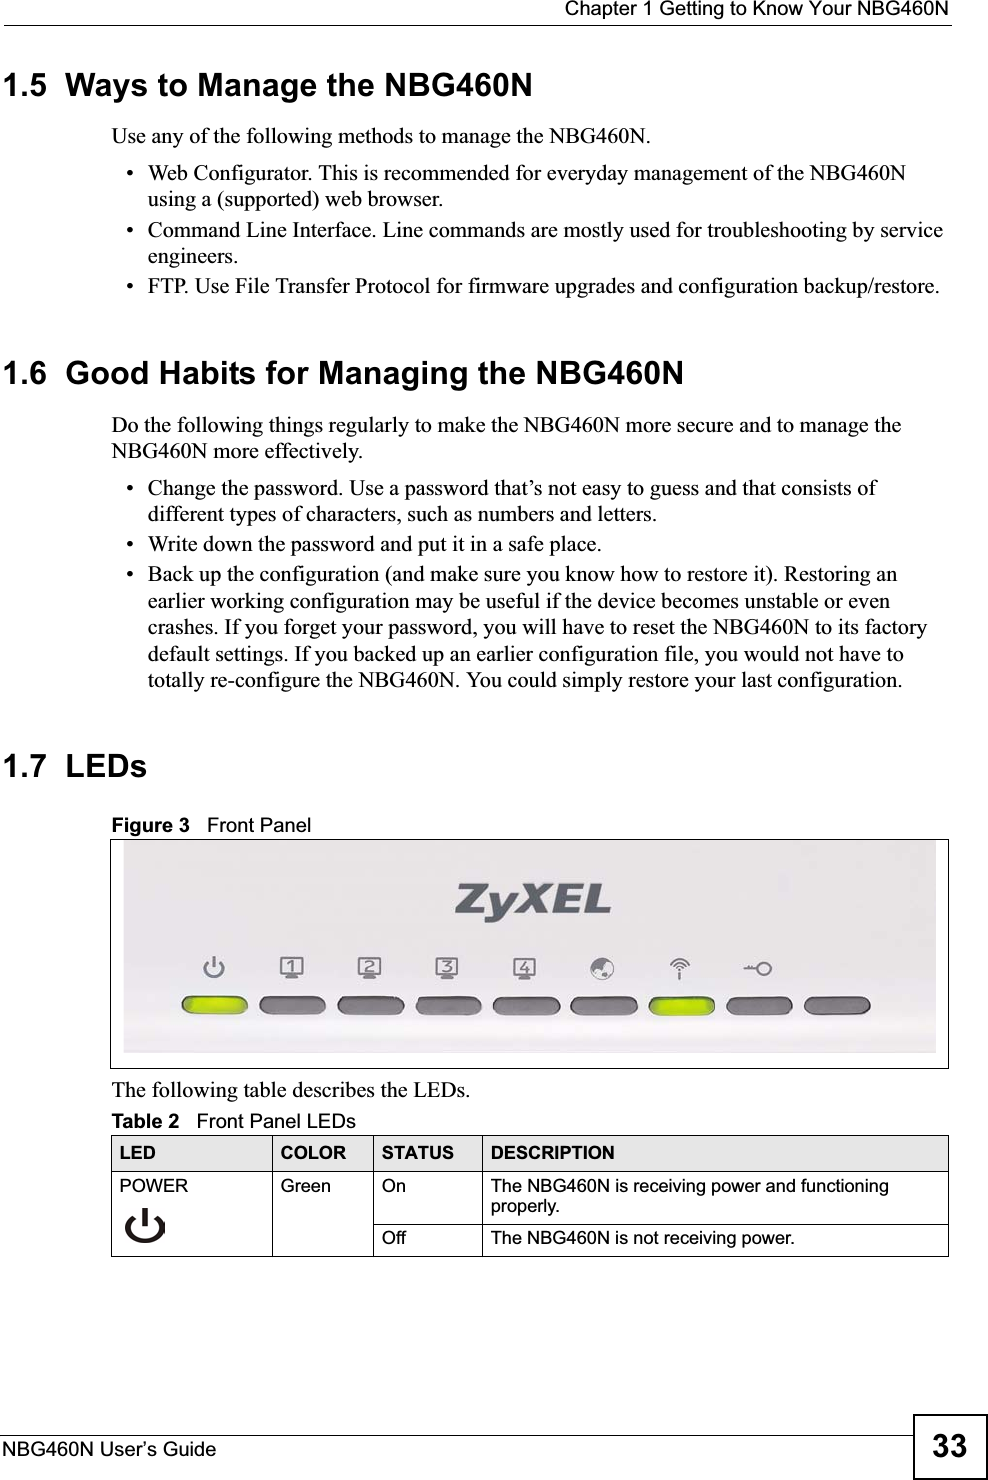  Chapter 1 Getting to Know Your NBG460NNBG460N User’s Guide 331.5  Ways to Manage the NBG460NUse any of the following methods to manage the NBG460N.• Web Configurator. This is recommended for everyday management of the NBG460N using a (supported) web browser. • Command Line Interface. Line commands are mostly used for troubleshooting by service engineers.  • FTP. Use File Transfer Protocol for firmware upgrades and configuration backup/restore.1.6  Good Habits for Managing the NBG460NDo the following things regularly to make the NBG460N more secure and to manage the NBG460N more effectively.• Change the password. Use a password that’s not easy to guess and that consists of different types of characters, such as numbers and letters.• Write down the password and put it in a safe place.• Back up the configuration (and make sure you know how to restore it). Restoring an earlier working configuration may be useful if the device becomes unstable or even crashes. If you forget your password, you will have to reset the NBG460N to its factory default settings. If you backed up an earlier configuration file, you would not have to totally re-configure the NBG460N. You could simply restore your last configuration.1.7  LEDsFigure 3   Front PanelThe following table describes the LEDs.Table 2   Front Panel LEDsLED COLOR STATUS DESCRIPTIONPOWER Green On The NBG460N is receiving power and functioning properly. Off The NBG460N is not receiving power.